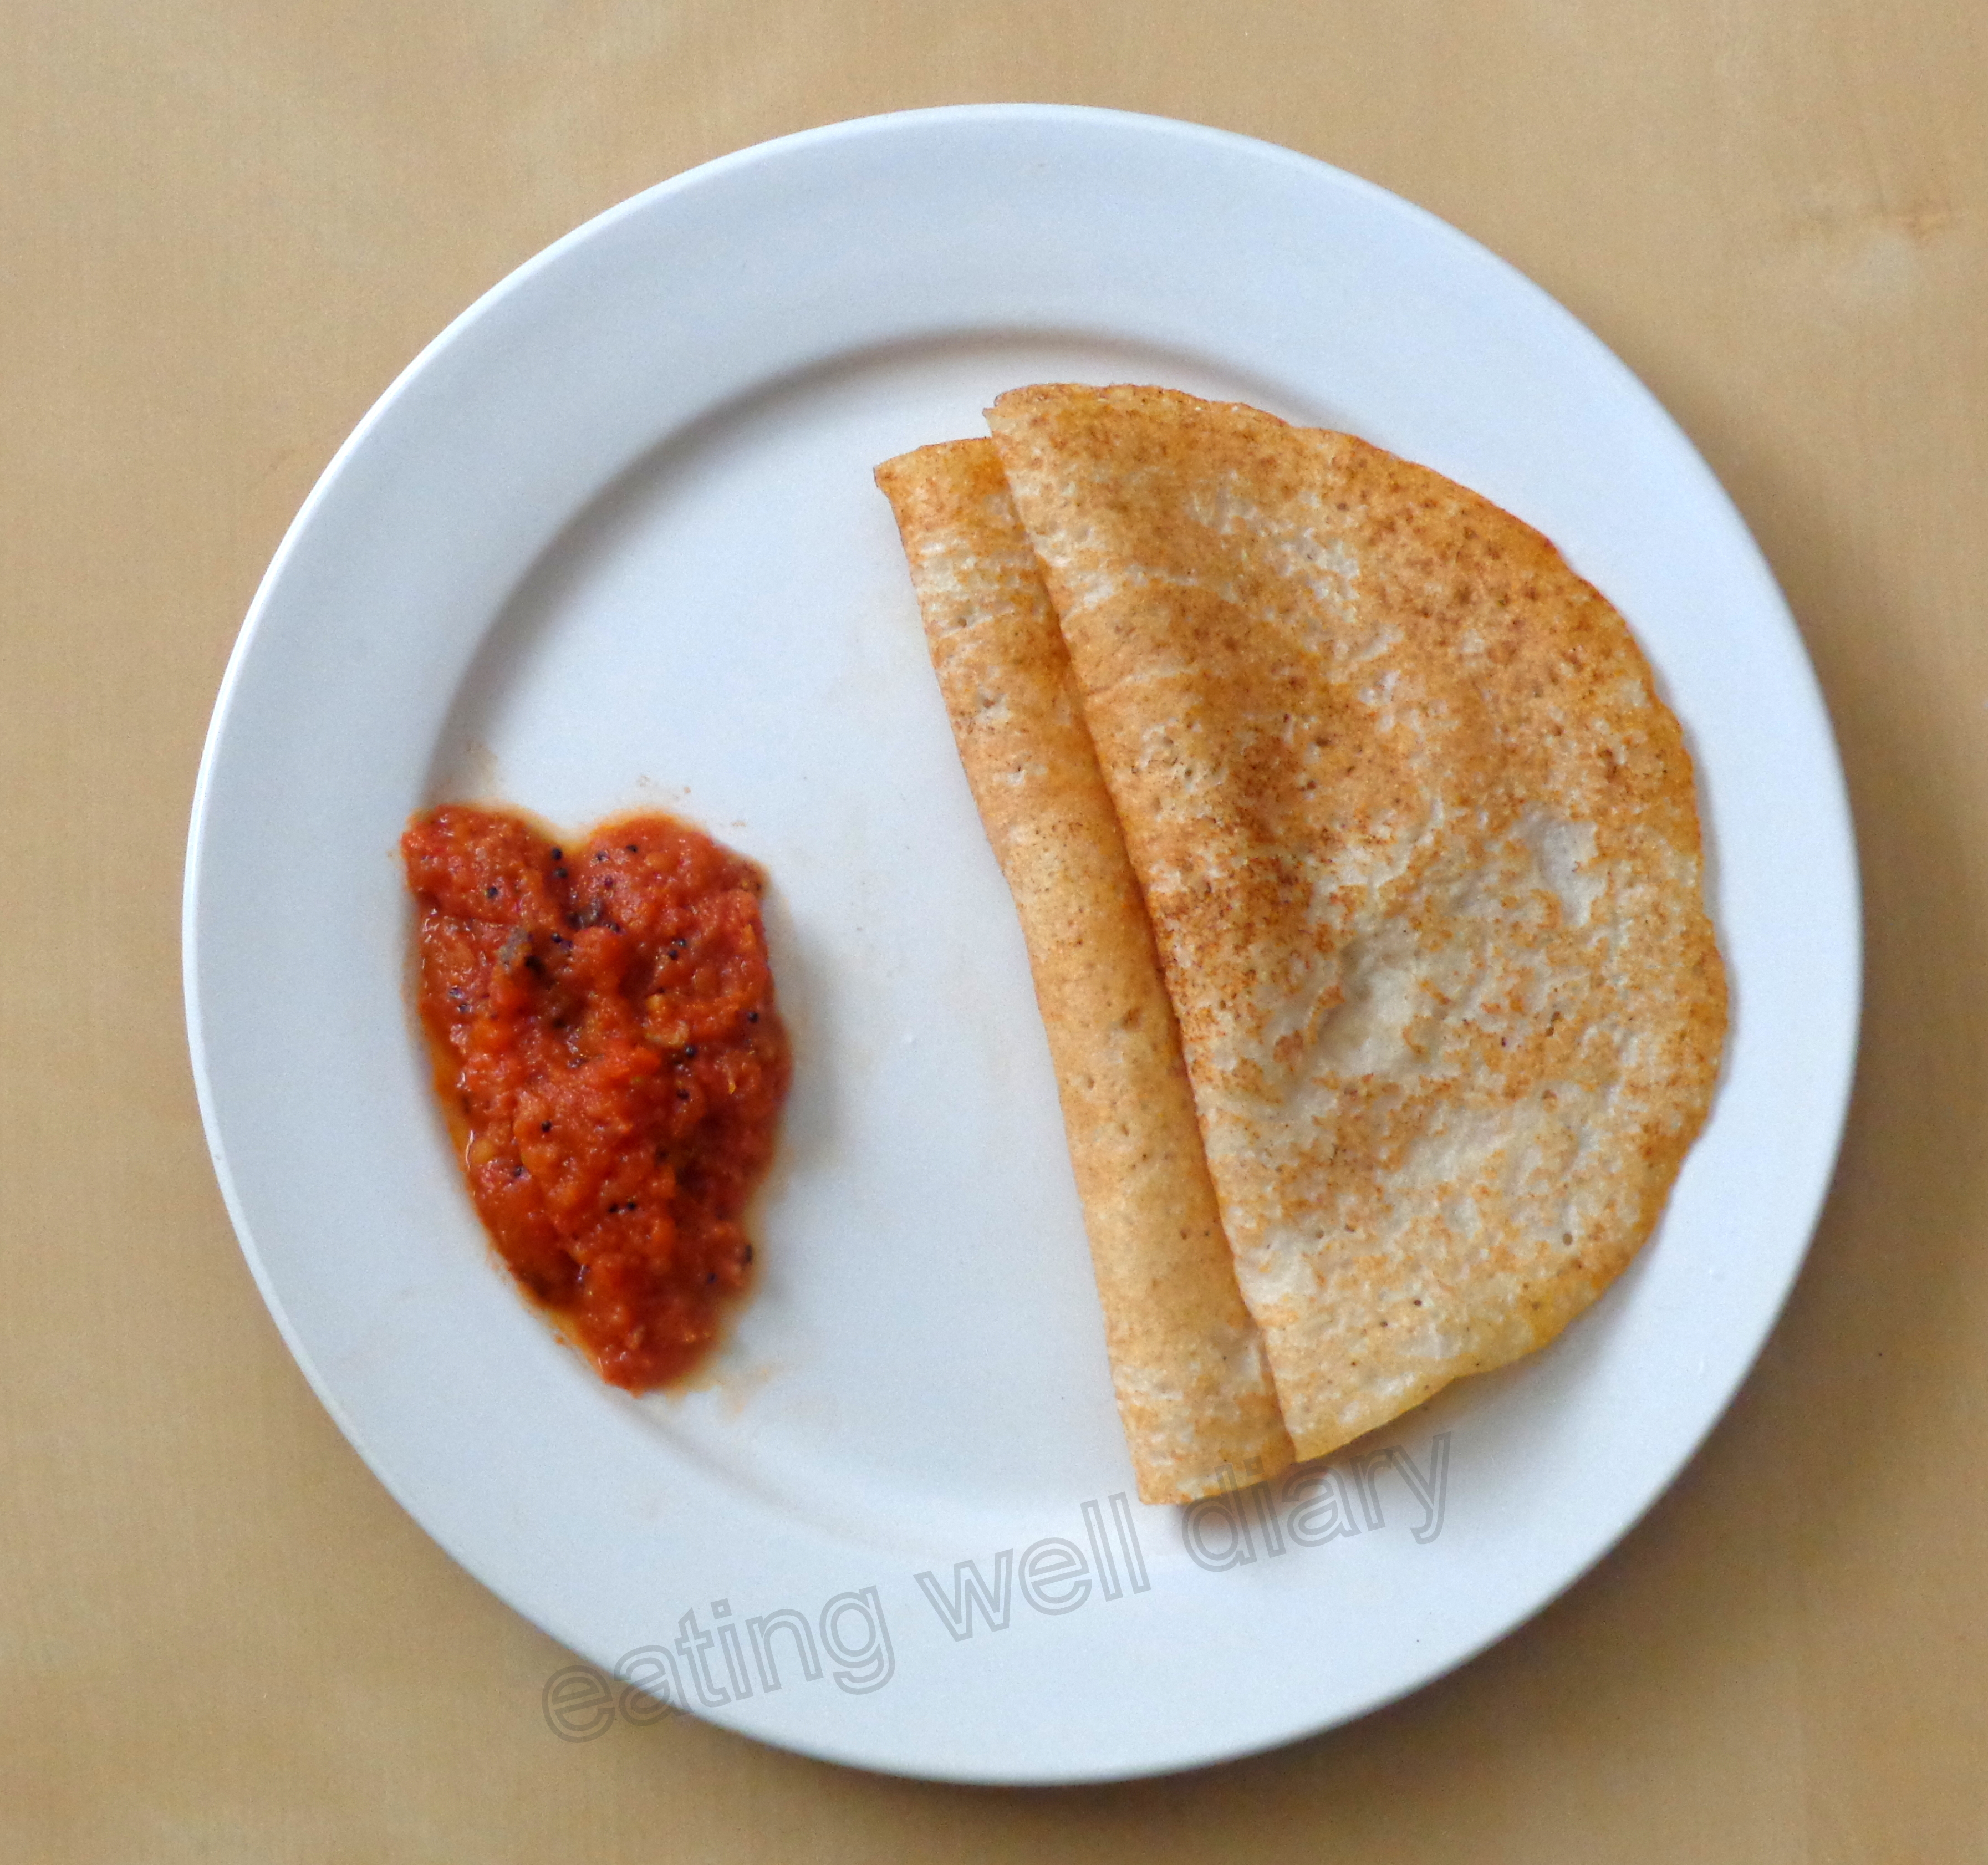 brown rice and lentil crepes (dosa)